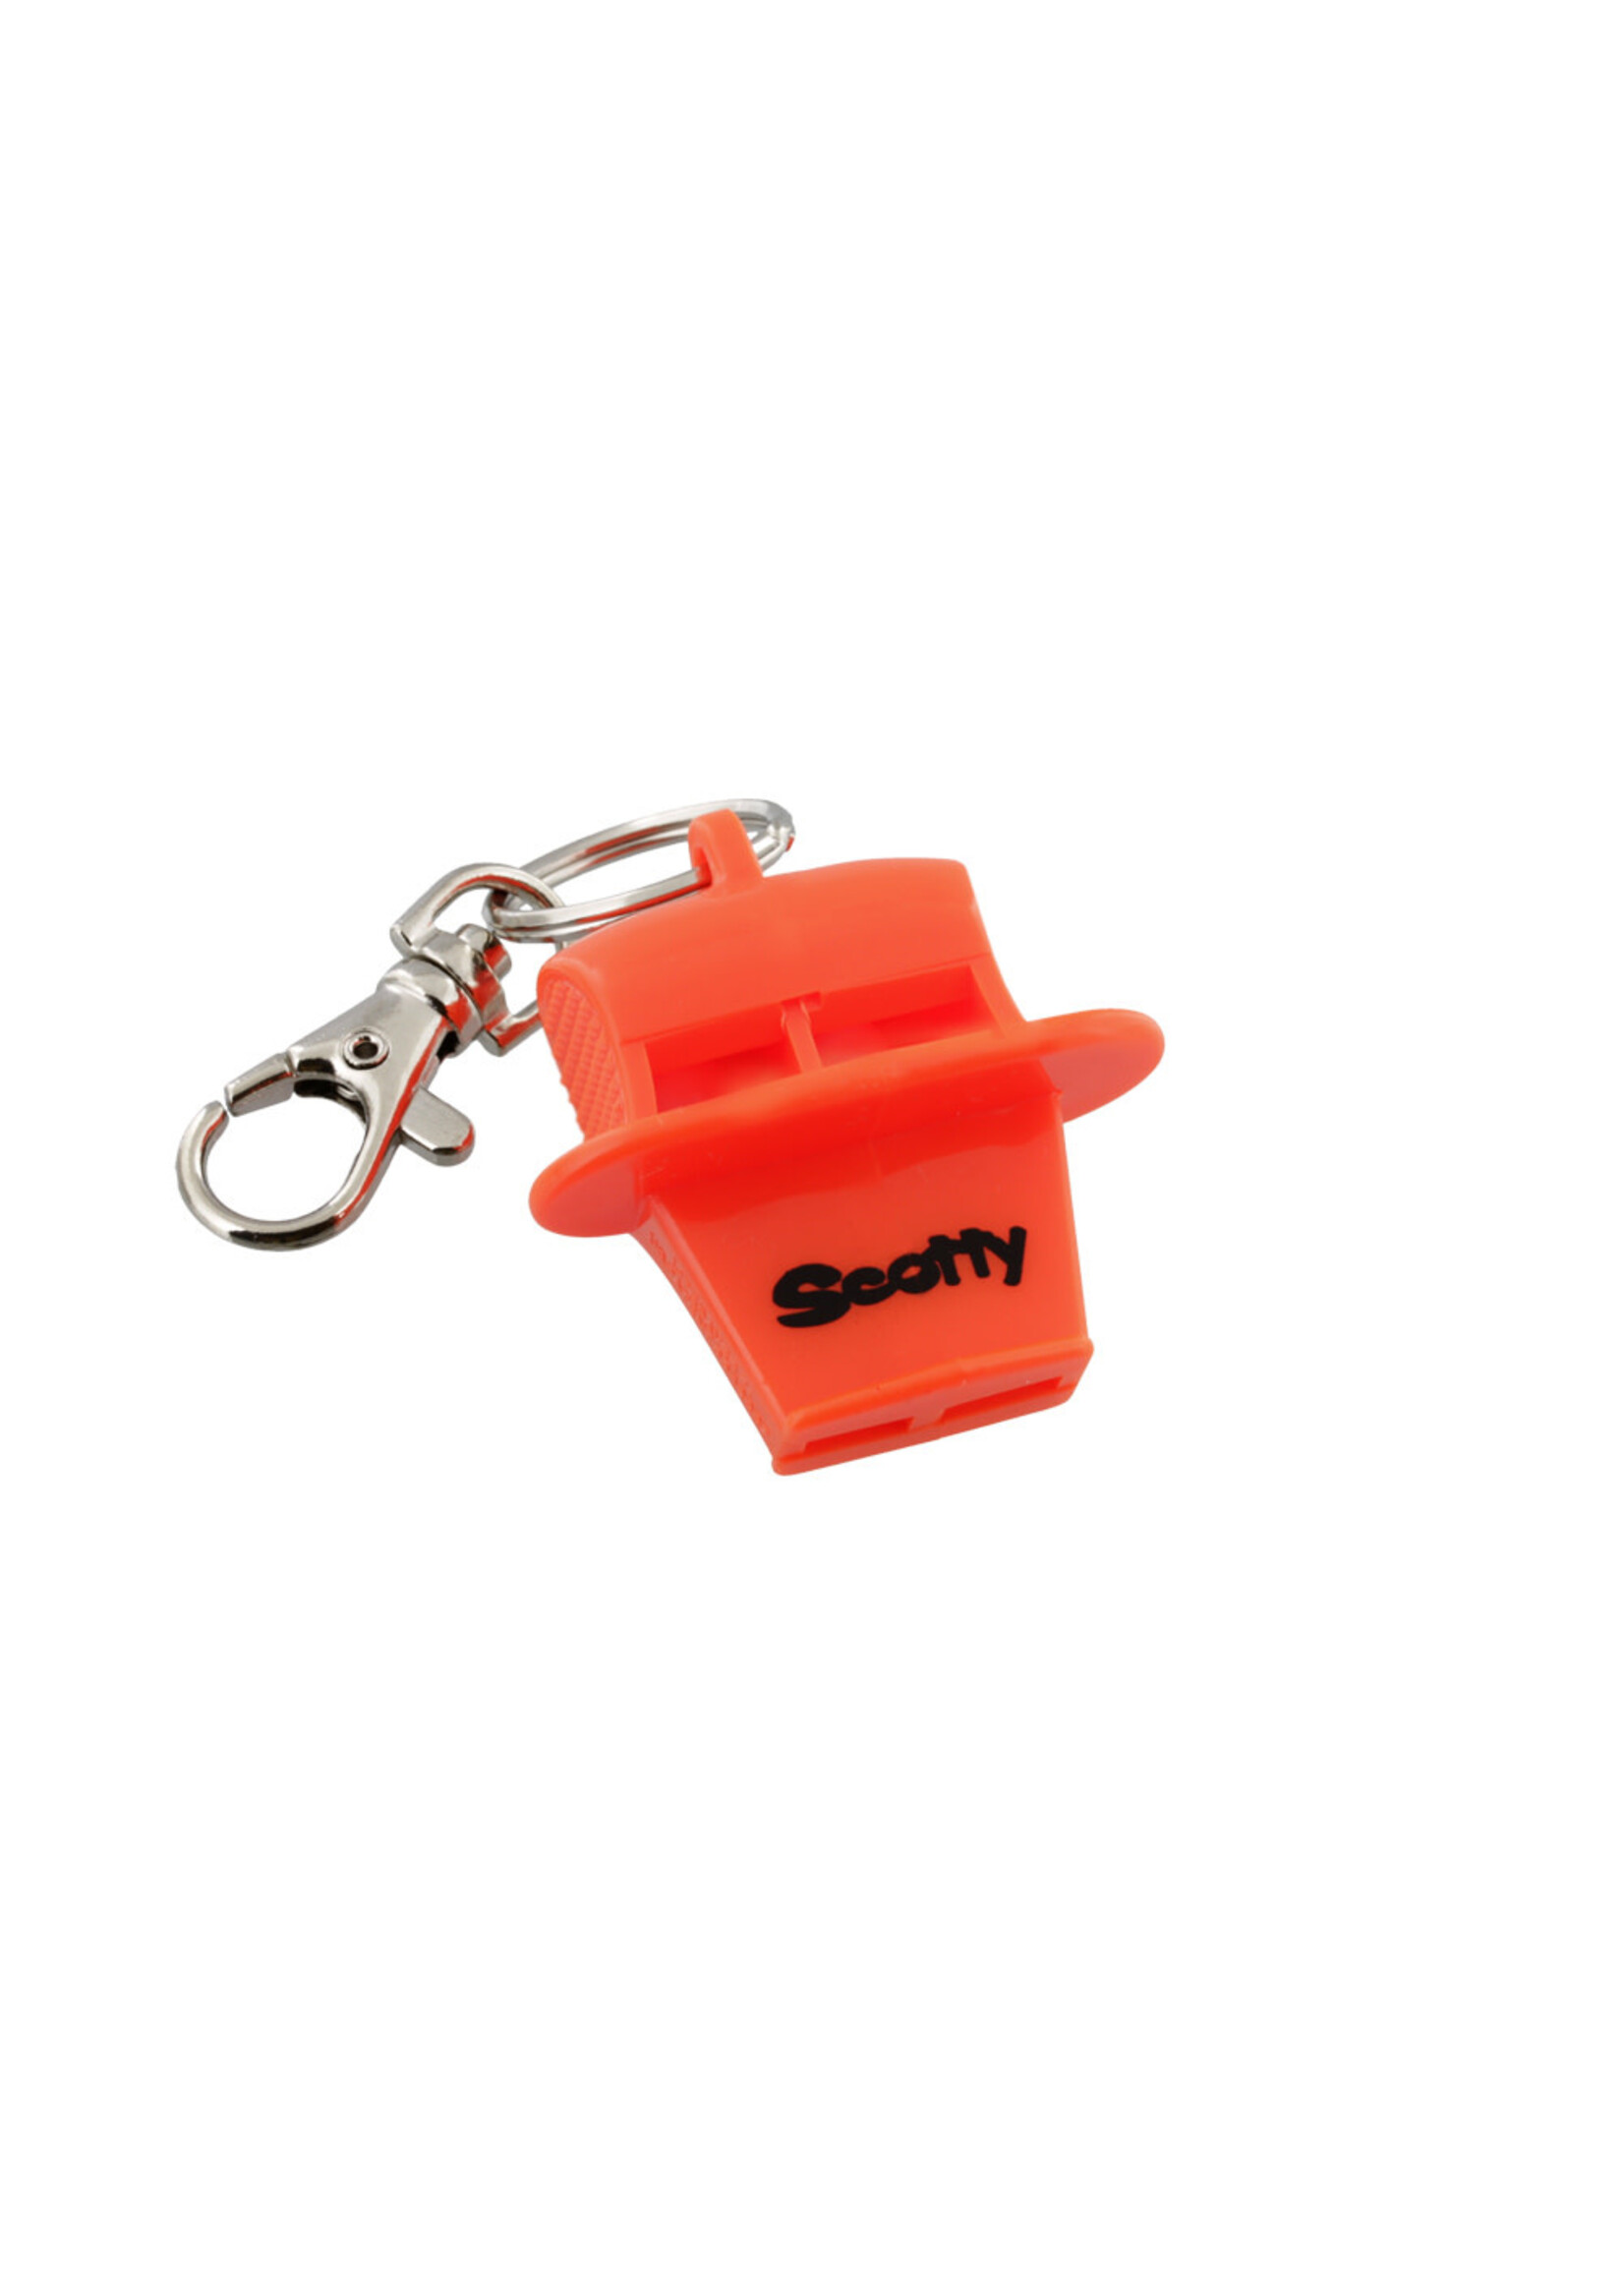 Scotty Inc 780 Safety Whistle